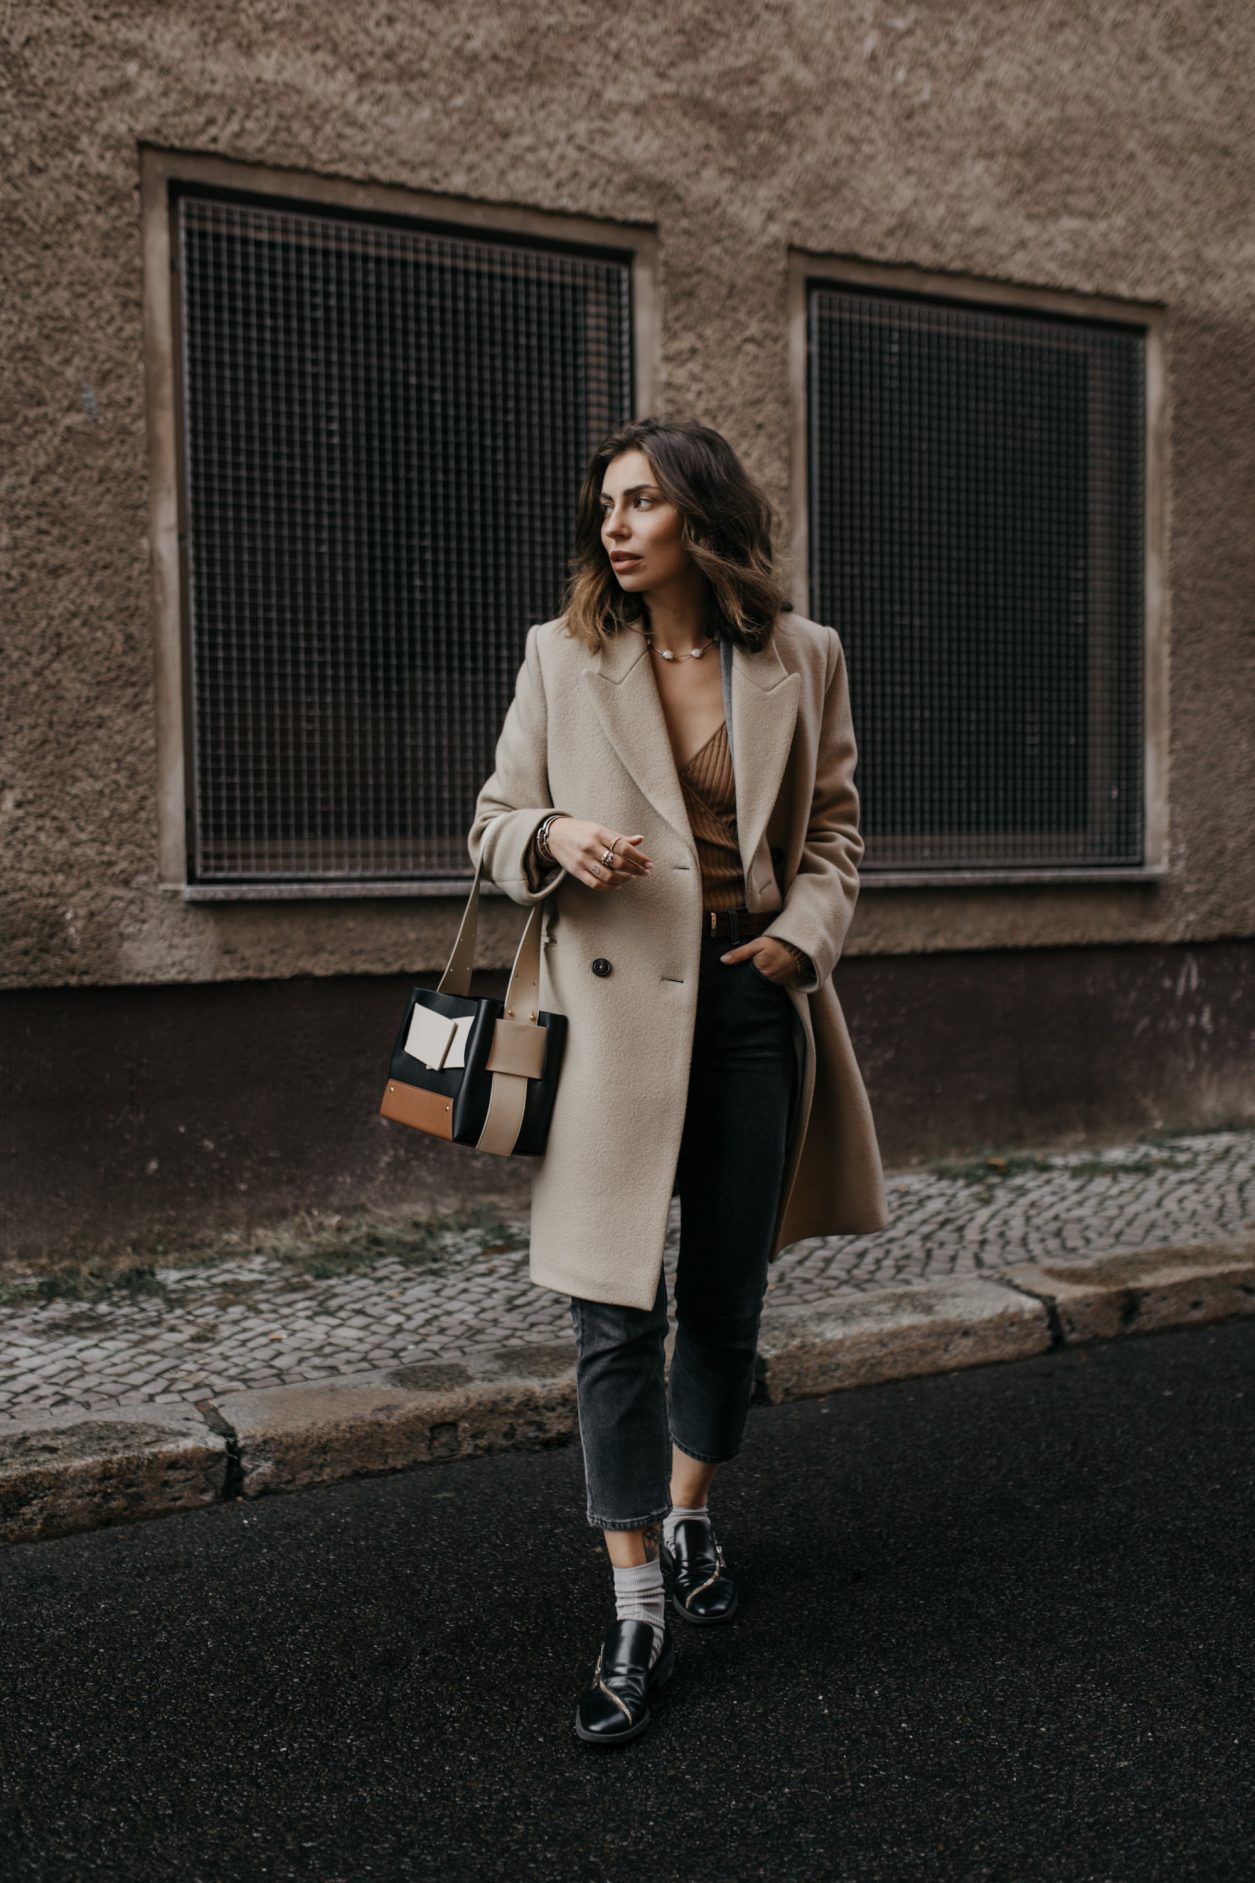 Streetstyle by Masha Sedgwick | Early spring city outfit inspiration, wearing beige classic Closed coat, beige-brown-black Yuzefi shoulder bag, grey Closed jeans, black &other Stories loafer with zipper, grey socks, grey Gestuz blazer, wrapped brown Baum & Pferdgarten shirt | Berlin street style editorial shooting